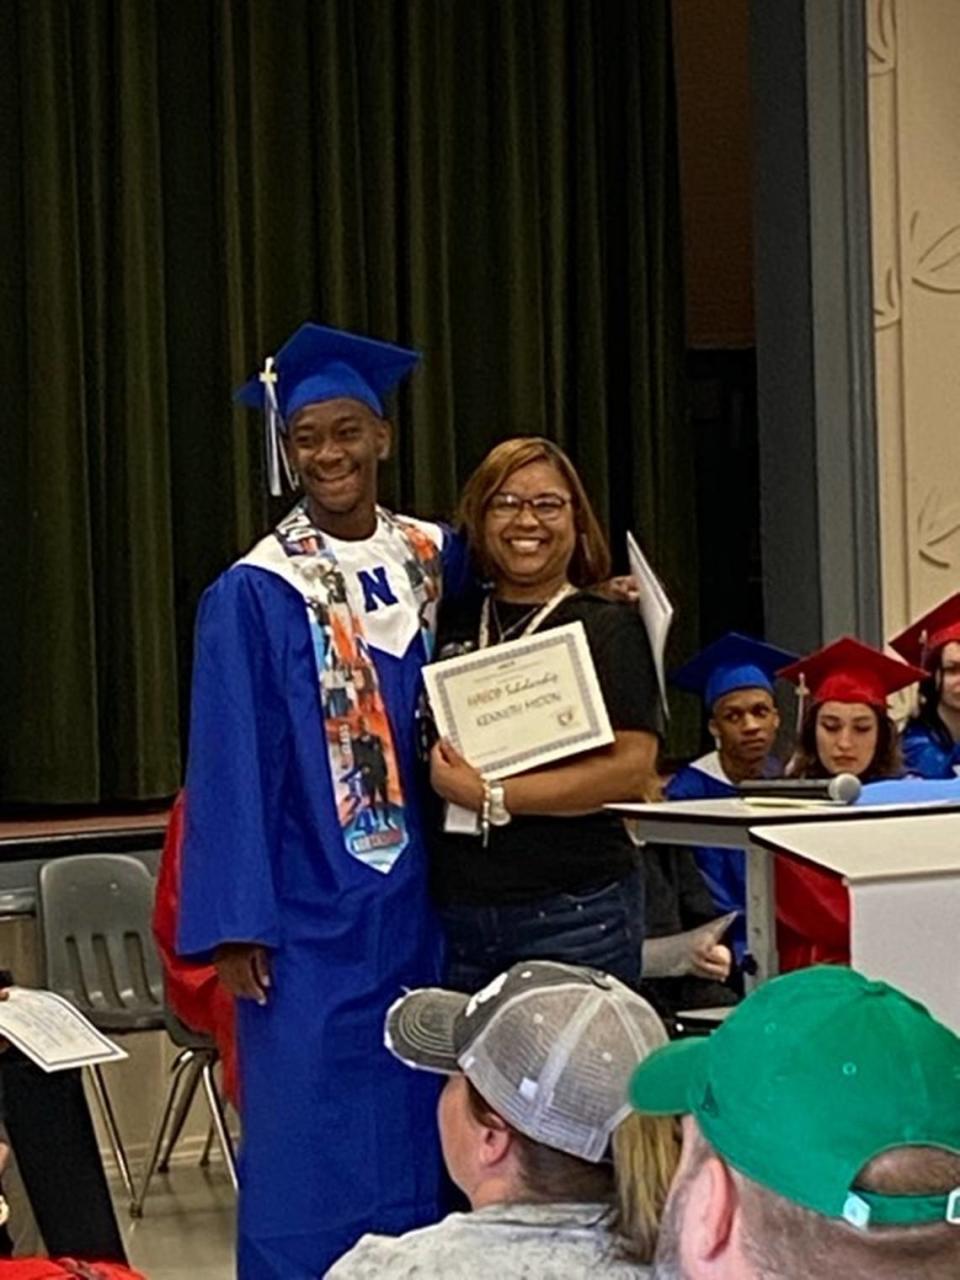 Northside High School student athlete Kenneth Milton Jr. accepts his $1,000 scholarship at Winn Academy on May 16. He said the stipend will help further his education at Georgia State University.